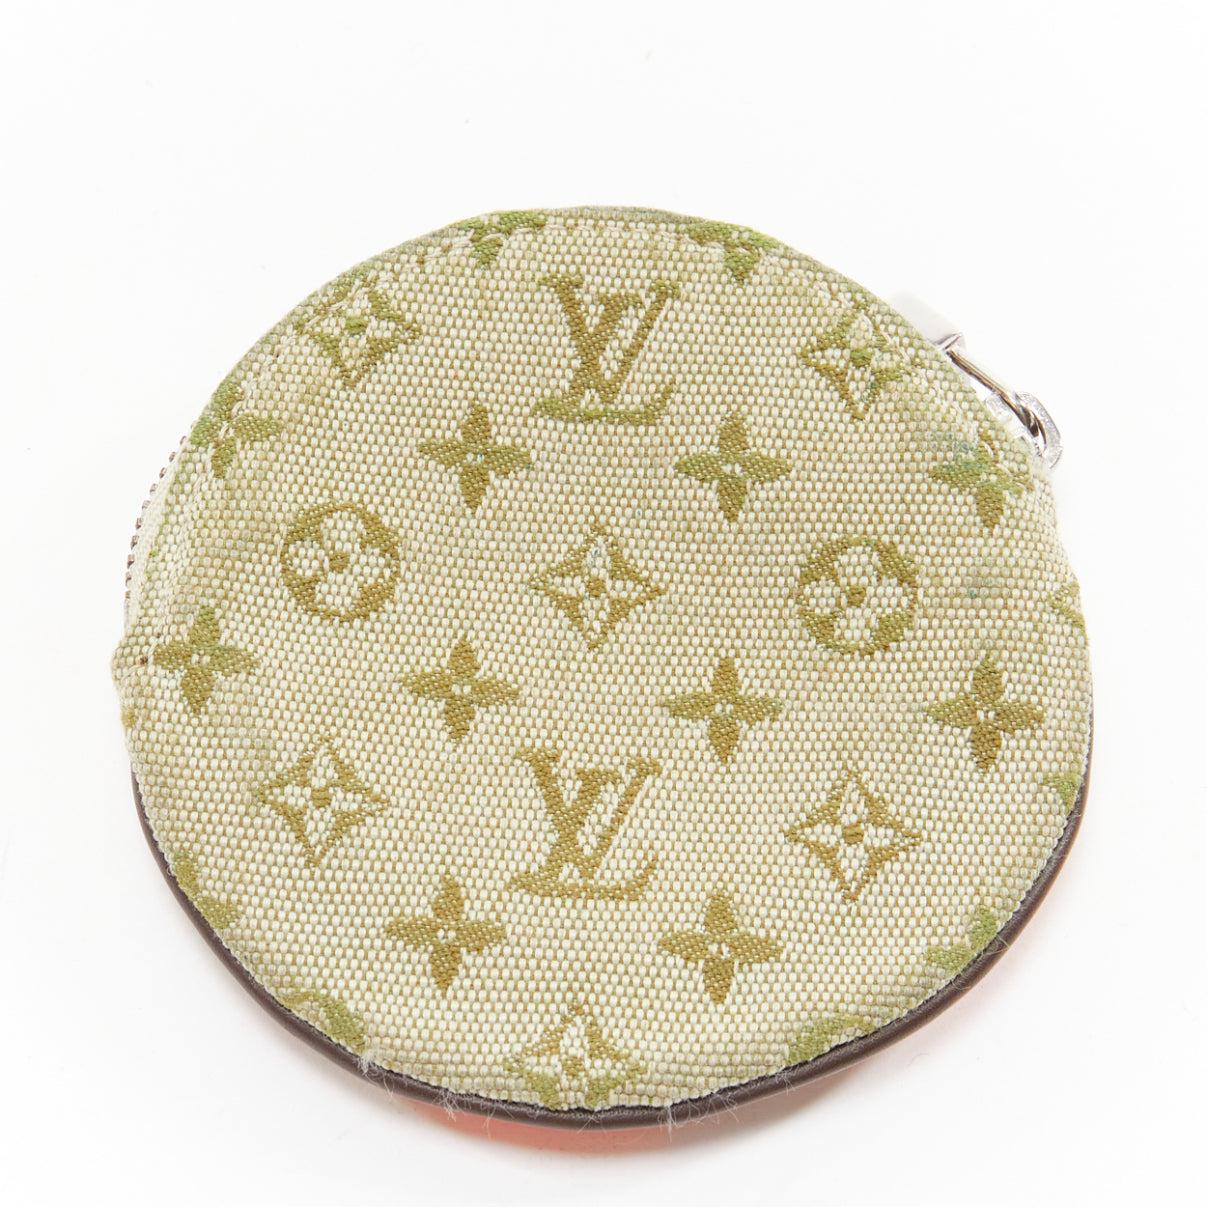 LOUIS VUITTON Vintage Mini Comte du Fees monogram orange butterfly coin bag
Reference: AAWC/A00990
Brand: Louis Vuitton
Designer: Marc Jacobs
Material: Leather, Fabric
Color: Green, Orange
Pattern: Monogram
Closure: Zip
Lining: Black Leather
Made